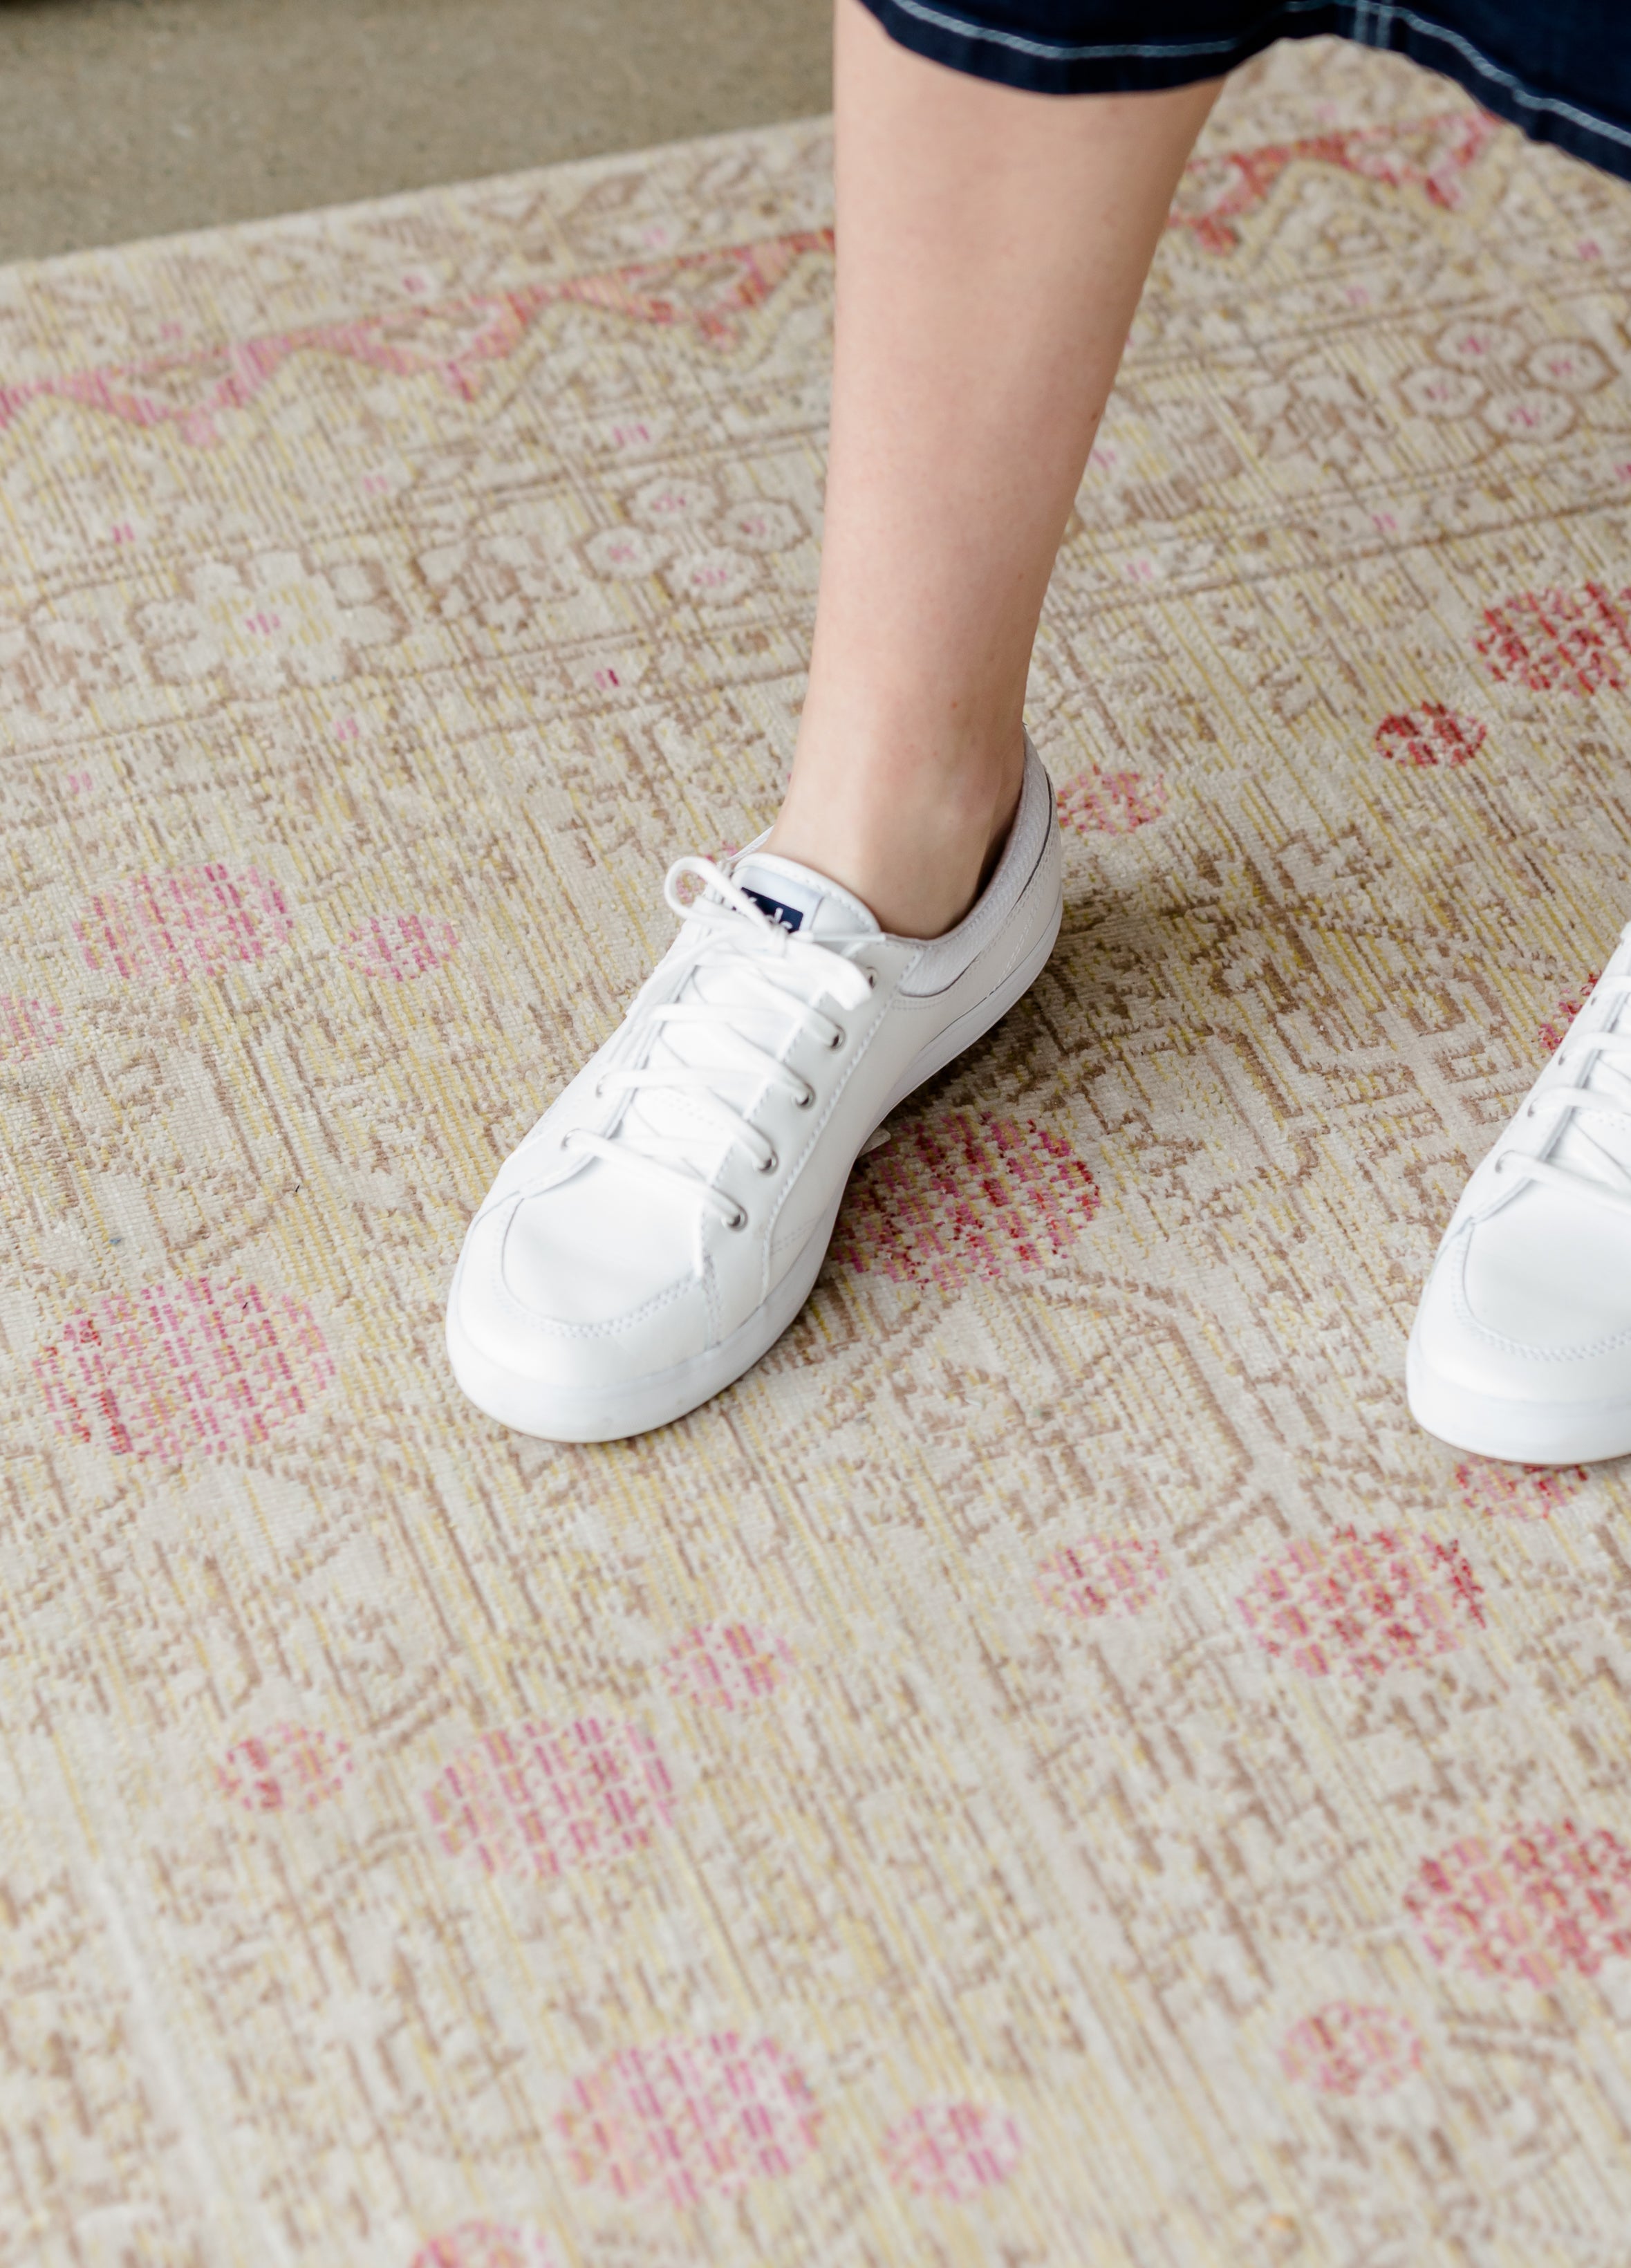 6 Stylish Shoes For Mums That Goes With (Almost) Everything!